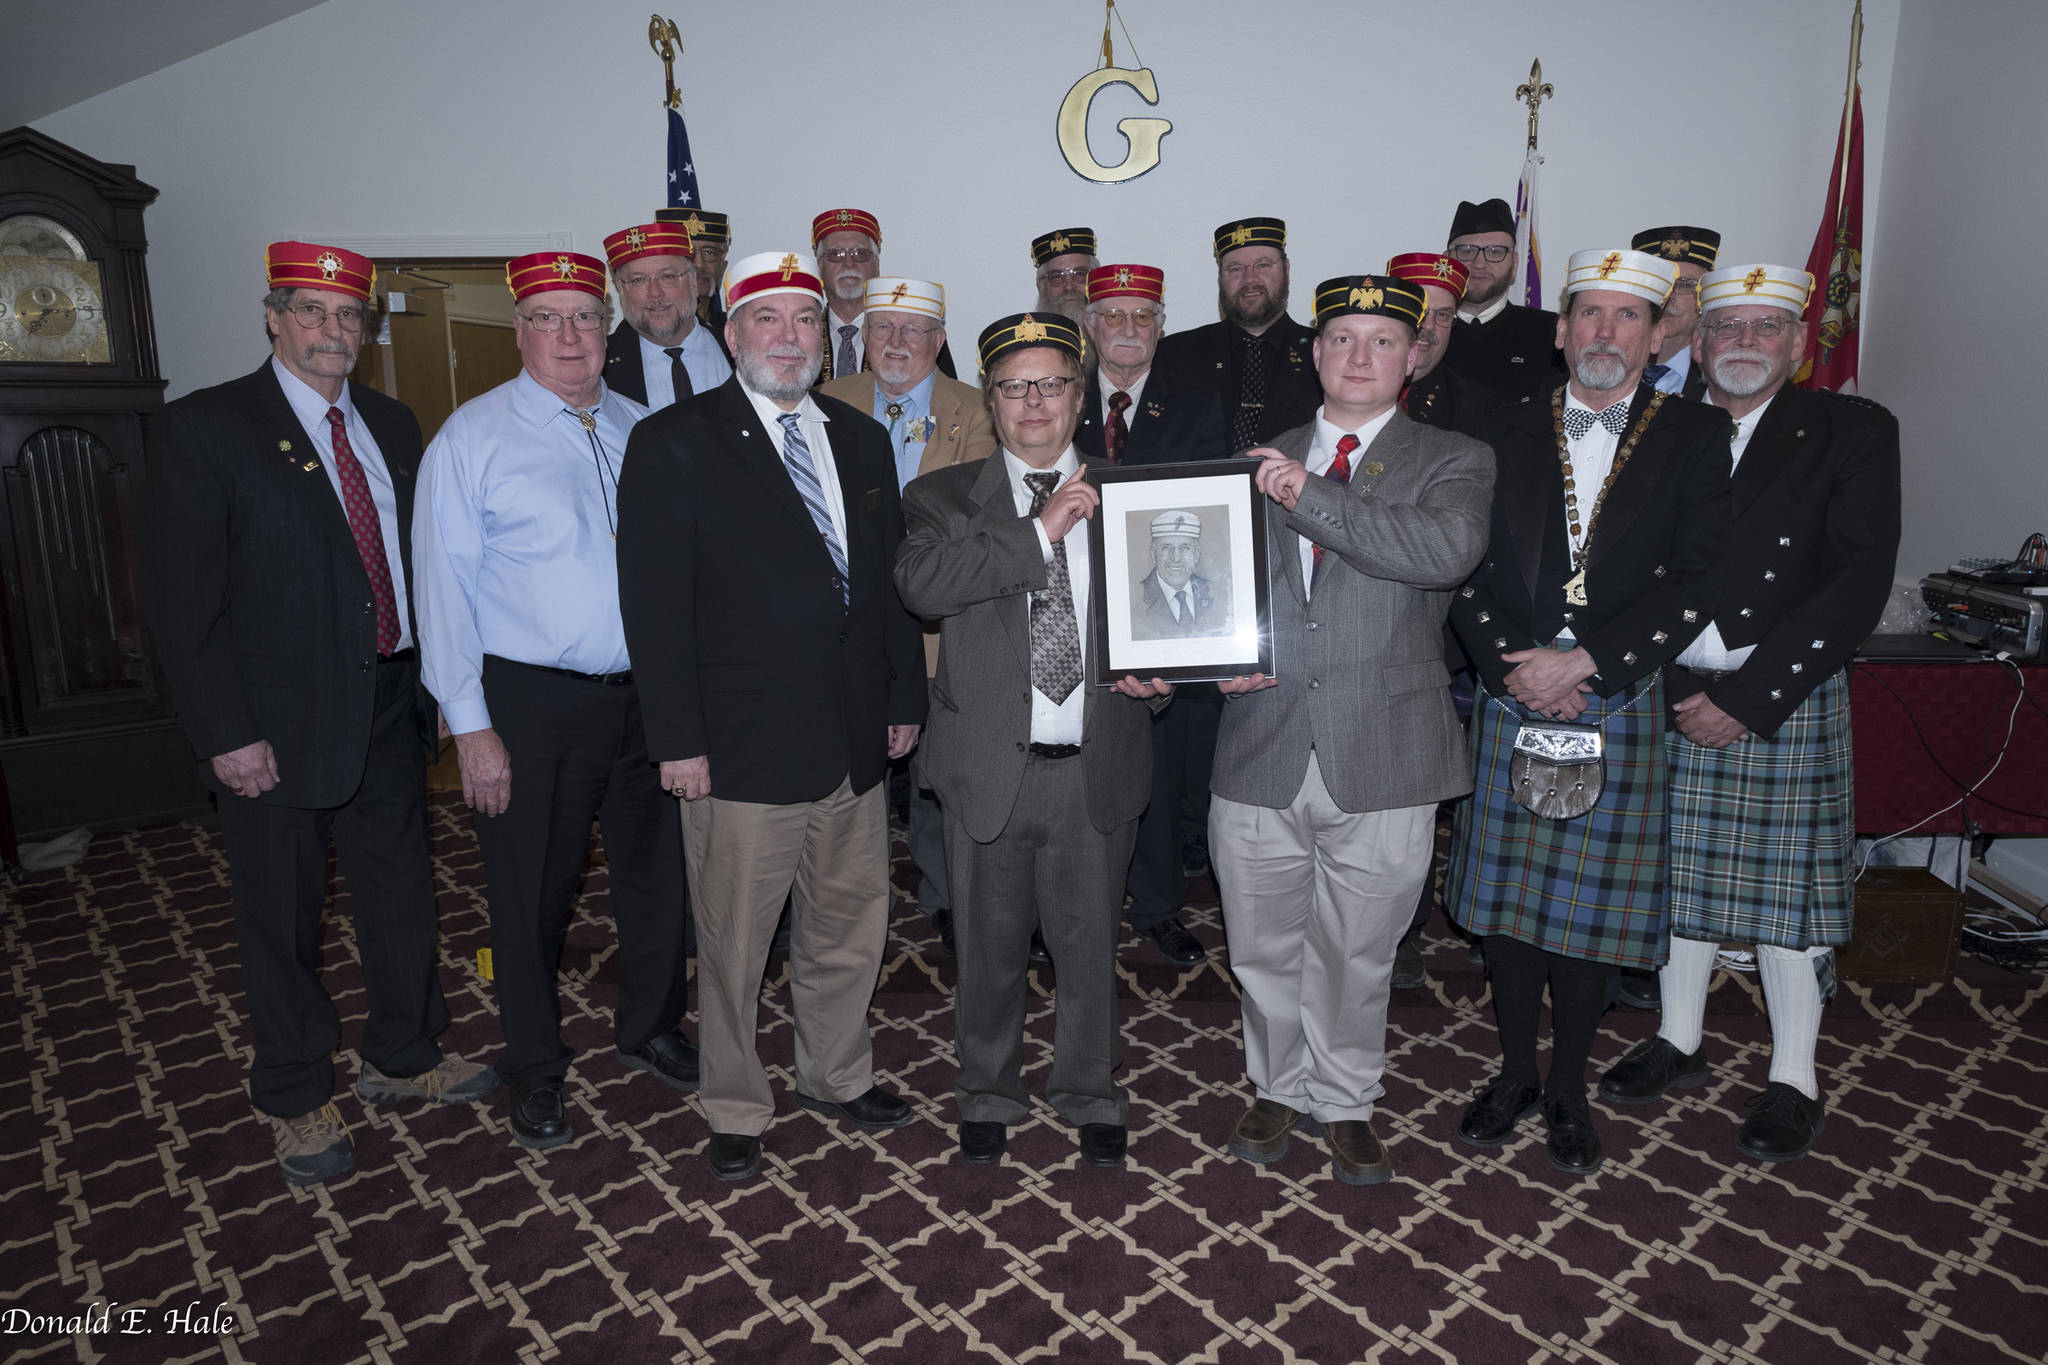 COURTESY PHOTO The Juneau Valley of the Ancient and Accepted Scottish Rite welcomed two new members at its 2017 reunion, held April 27-29 at the Juneau Masonic Center. Front row, center, are James Herr and Alex Simpson, the two men who became 32&